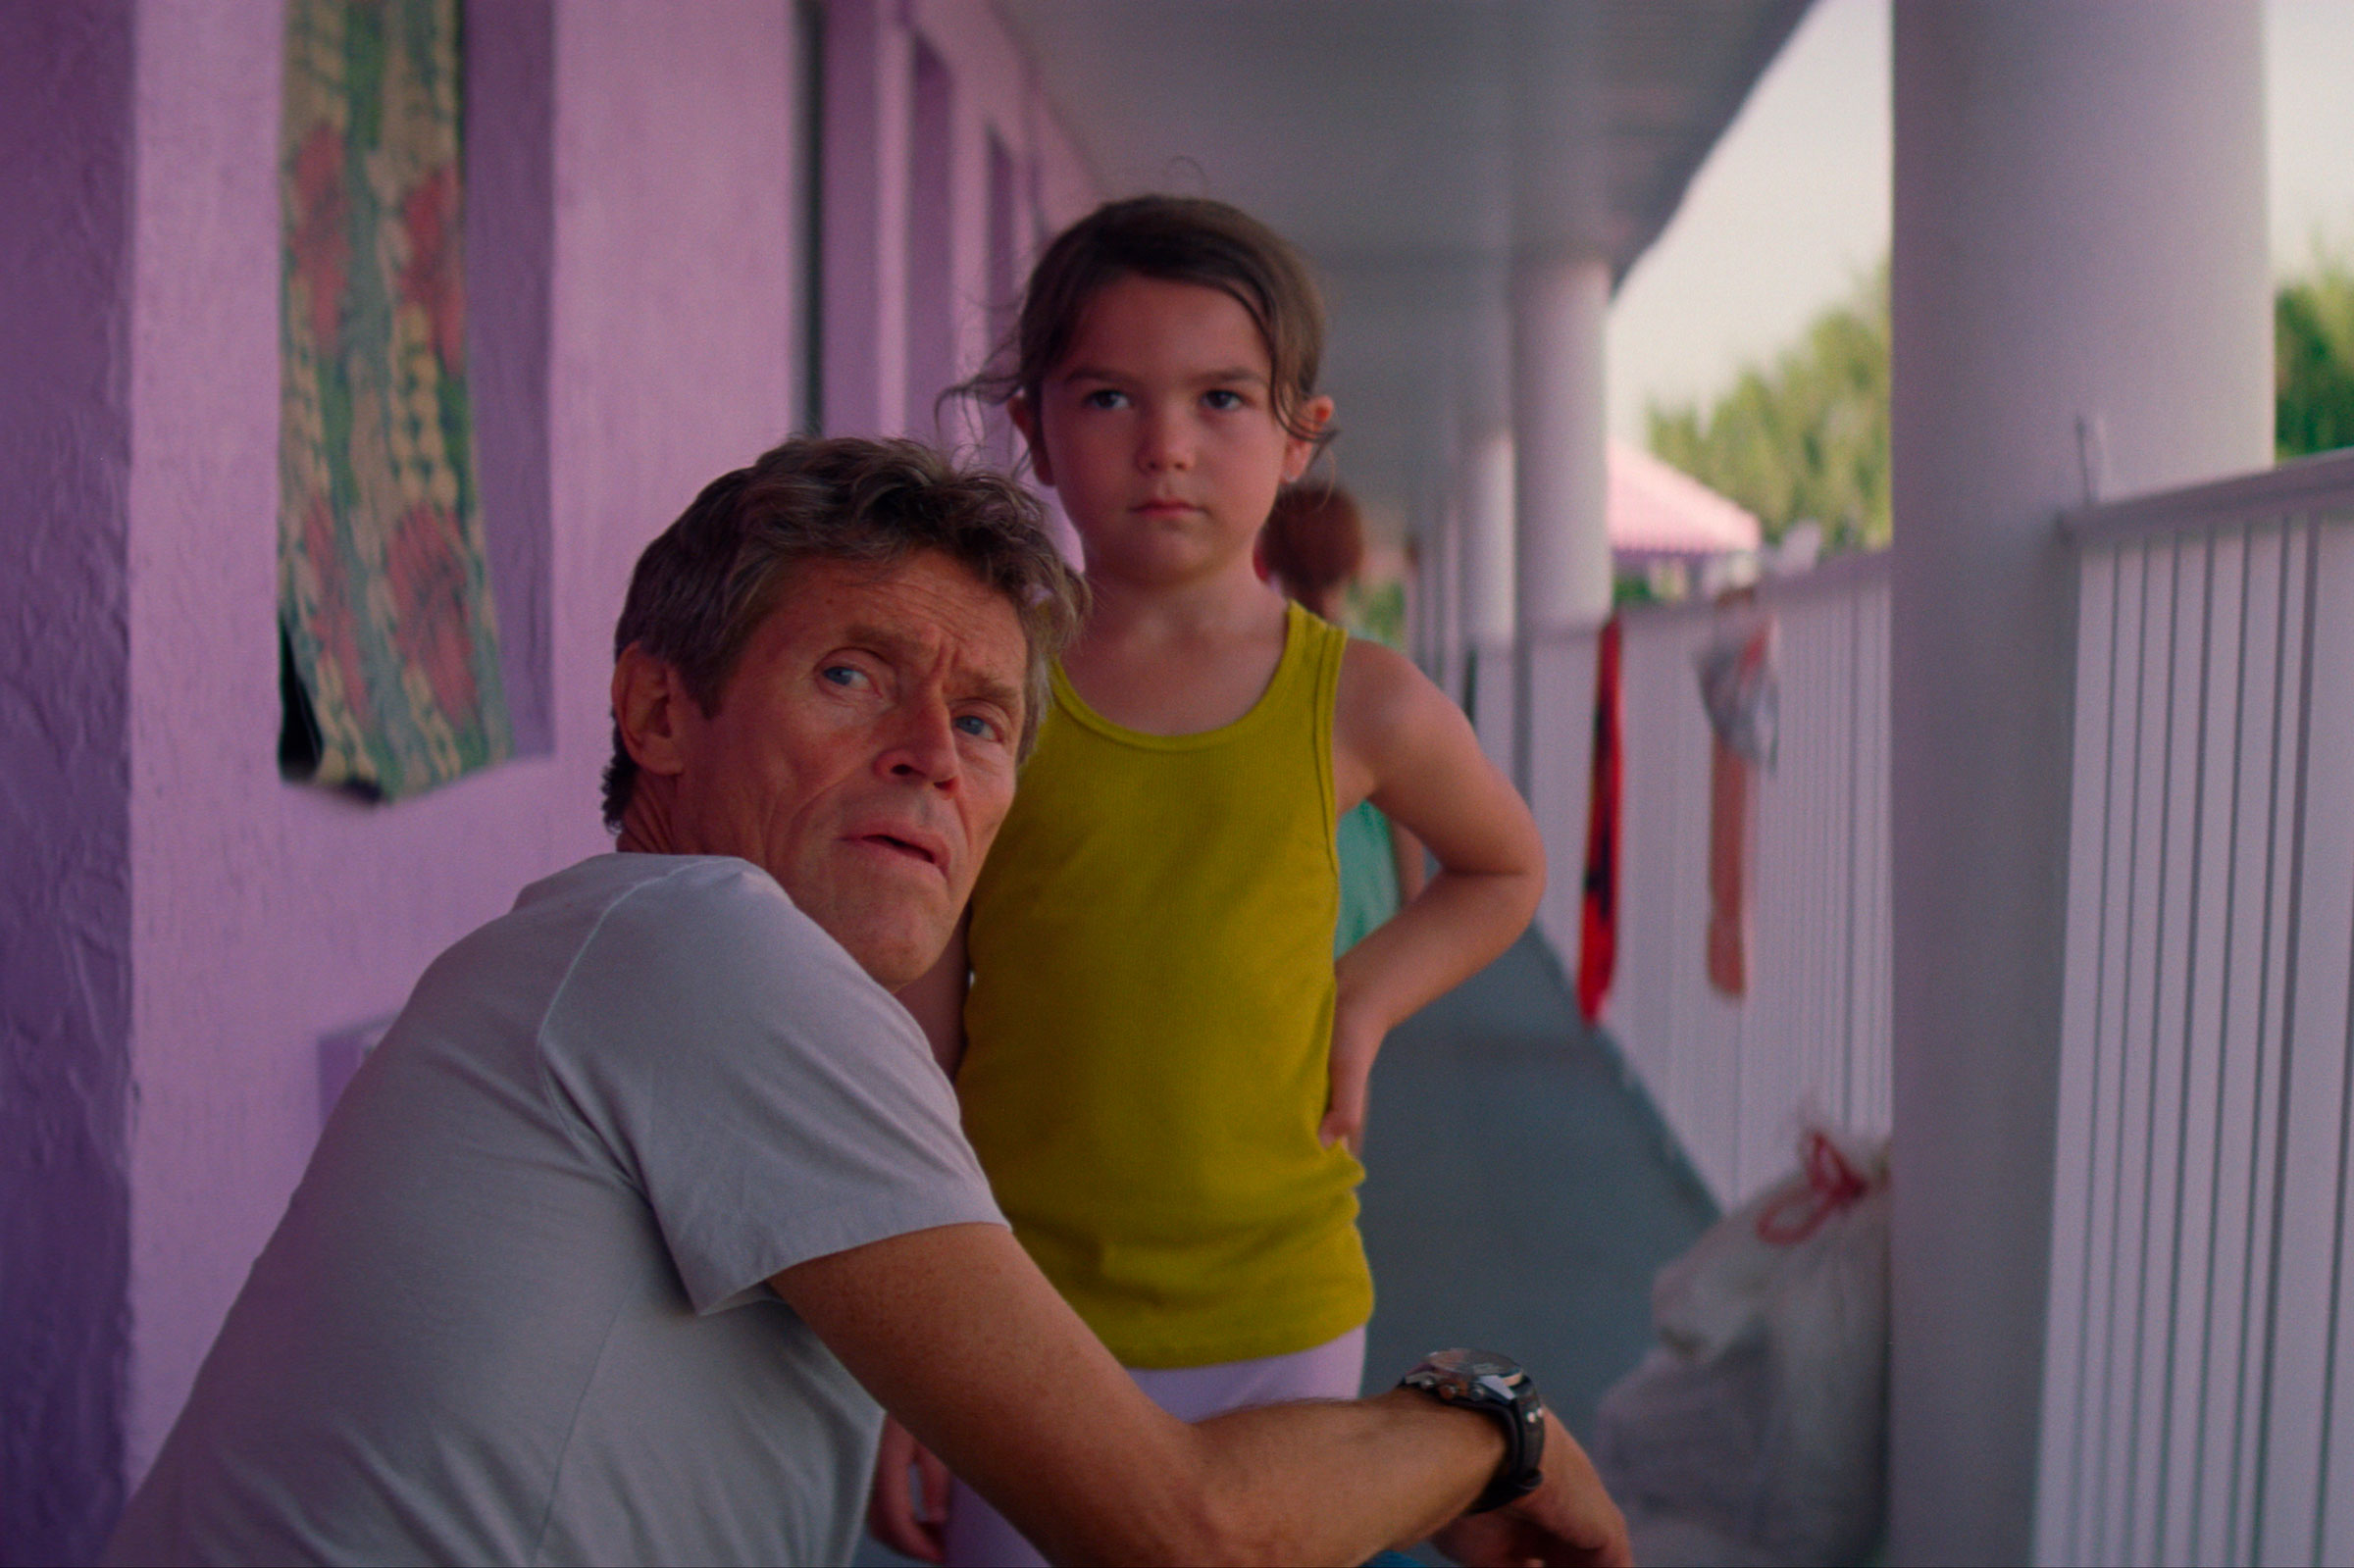 Willem Dafoe and Brooklynn Prince in 'The Florida Project'